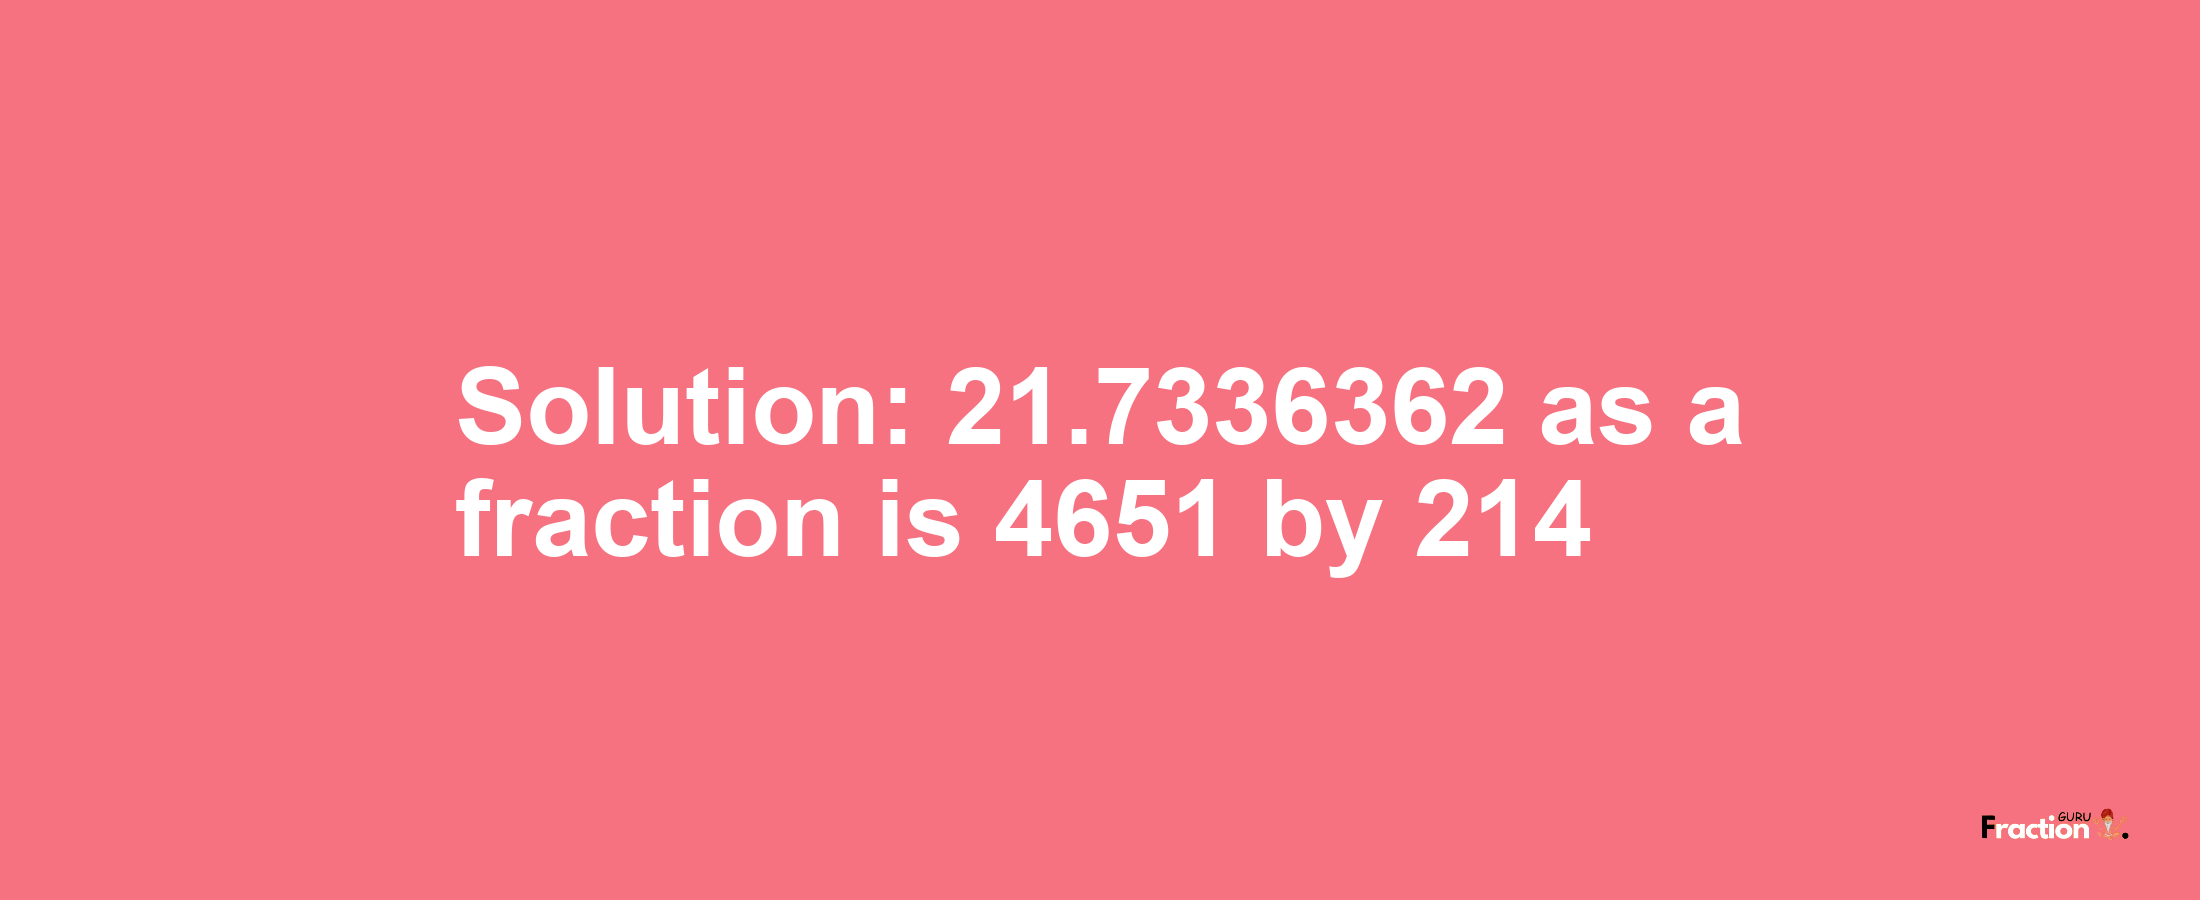 Solution:21.7336362 as a fraction is 4651/214